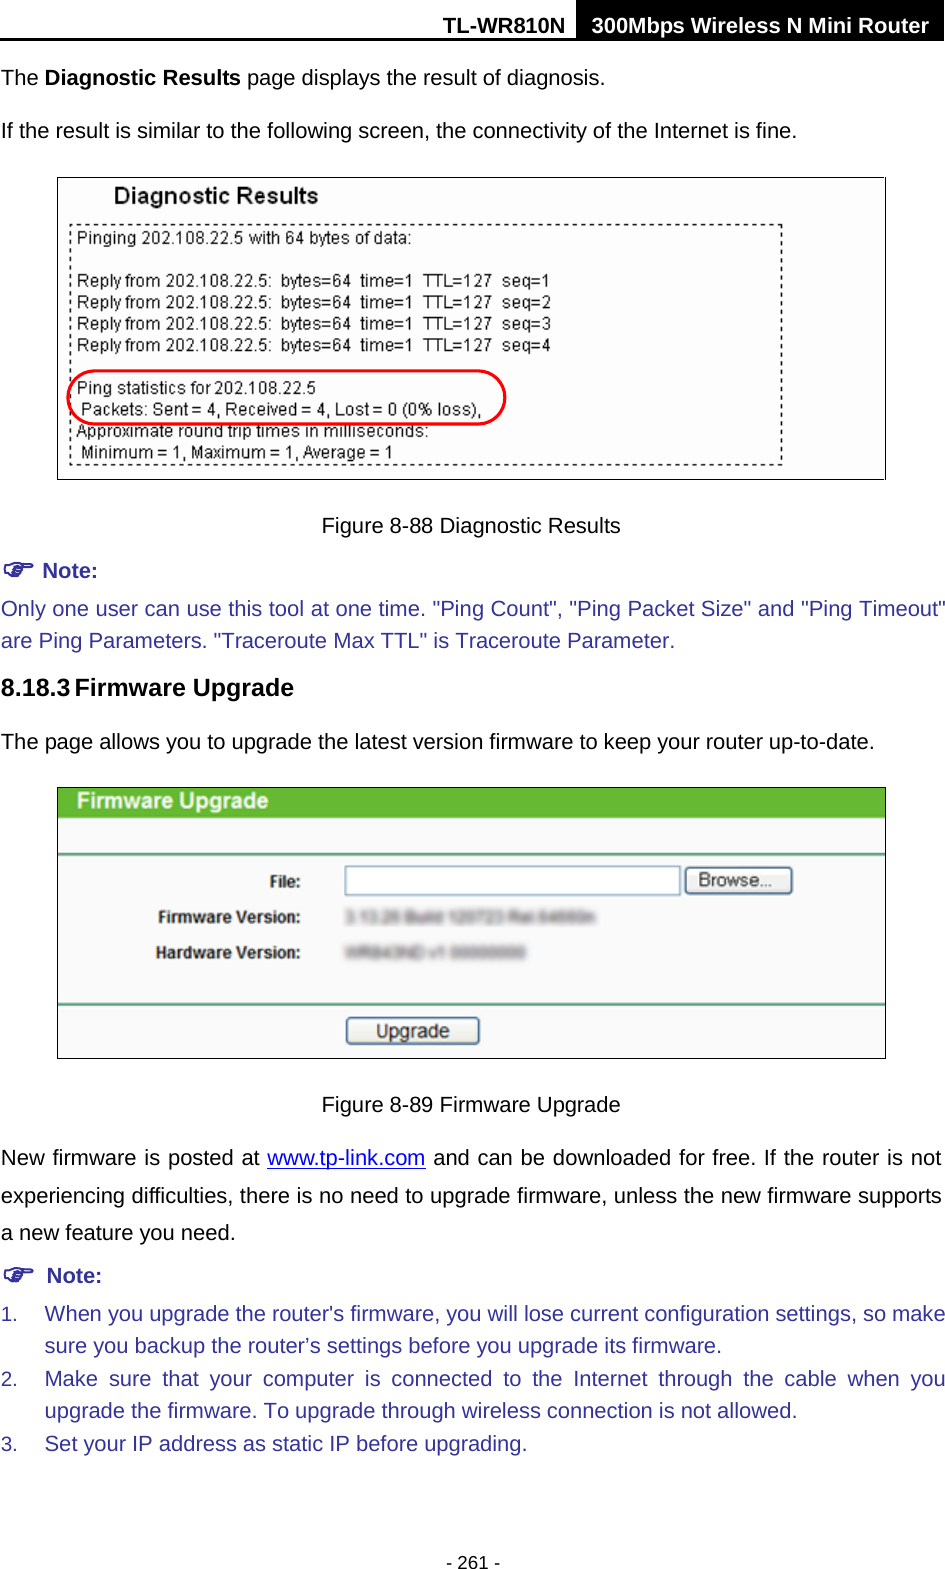 TL-WR810N 300Mbps Wireless N Mini Router  - 261 - The Diagnostic Results page displays the result of diagnosis. If the result is similar to the following screen, the connectivity of the Internet is fine.  Figure 8-88 Diagnostic Results  Note: Only one user can use this tool at one time. &quot;Ping Count&quot;, &quot;Ping Packet Size&quot; and &quot;Ping Timeout&quot; are Ping Parameters. &quot;Traceroute Max TTL&quot; is Traceroute Parameter.   8.18.3 Firmware Upgrade The page allows you to upgrade the latest version firmware to keep your router up-to-date.  Figure 8-89 Firmware Upgrade New firmware is posted at www.tp-link.com and can be downloaded for free. If the router is not experiencing difficulties, there is no need to upgrade firmware, unless the new firmware supports a new feature you need.  Note: 1. When you upgrade the router&apos;s firmware, you will lose current configuration settings, so make sure you backup the router’s settings before you upgrade its firmware.   2. Make sure that your computer is connected to the Internet through the cable when you upgrade the firmware. To upgrade through wireless connection is not allowed. 3. Set your IP address as static IP before upgrading. 